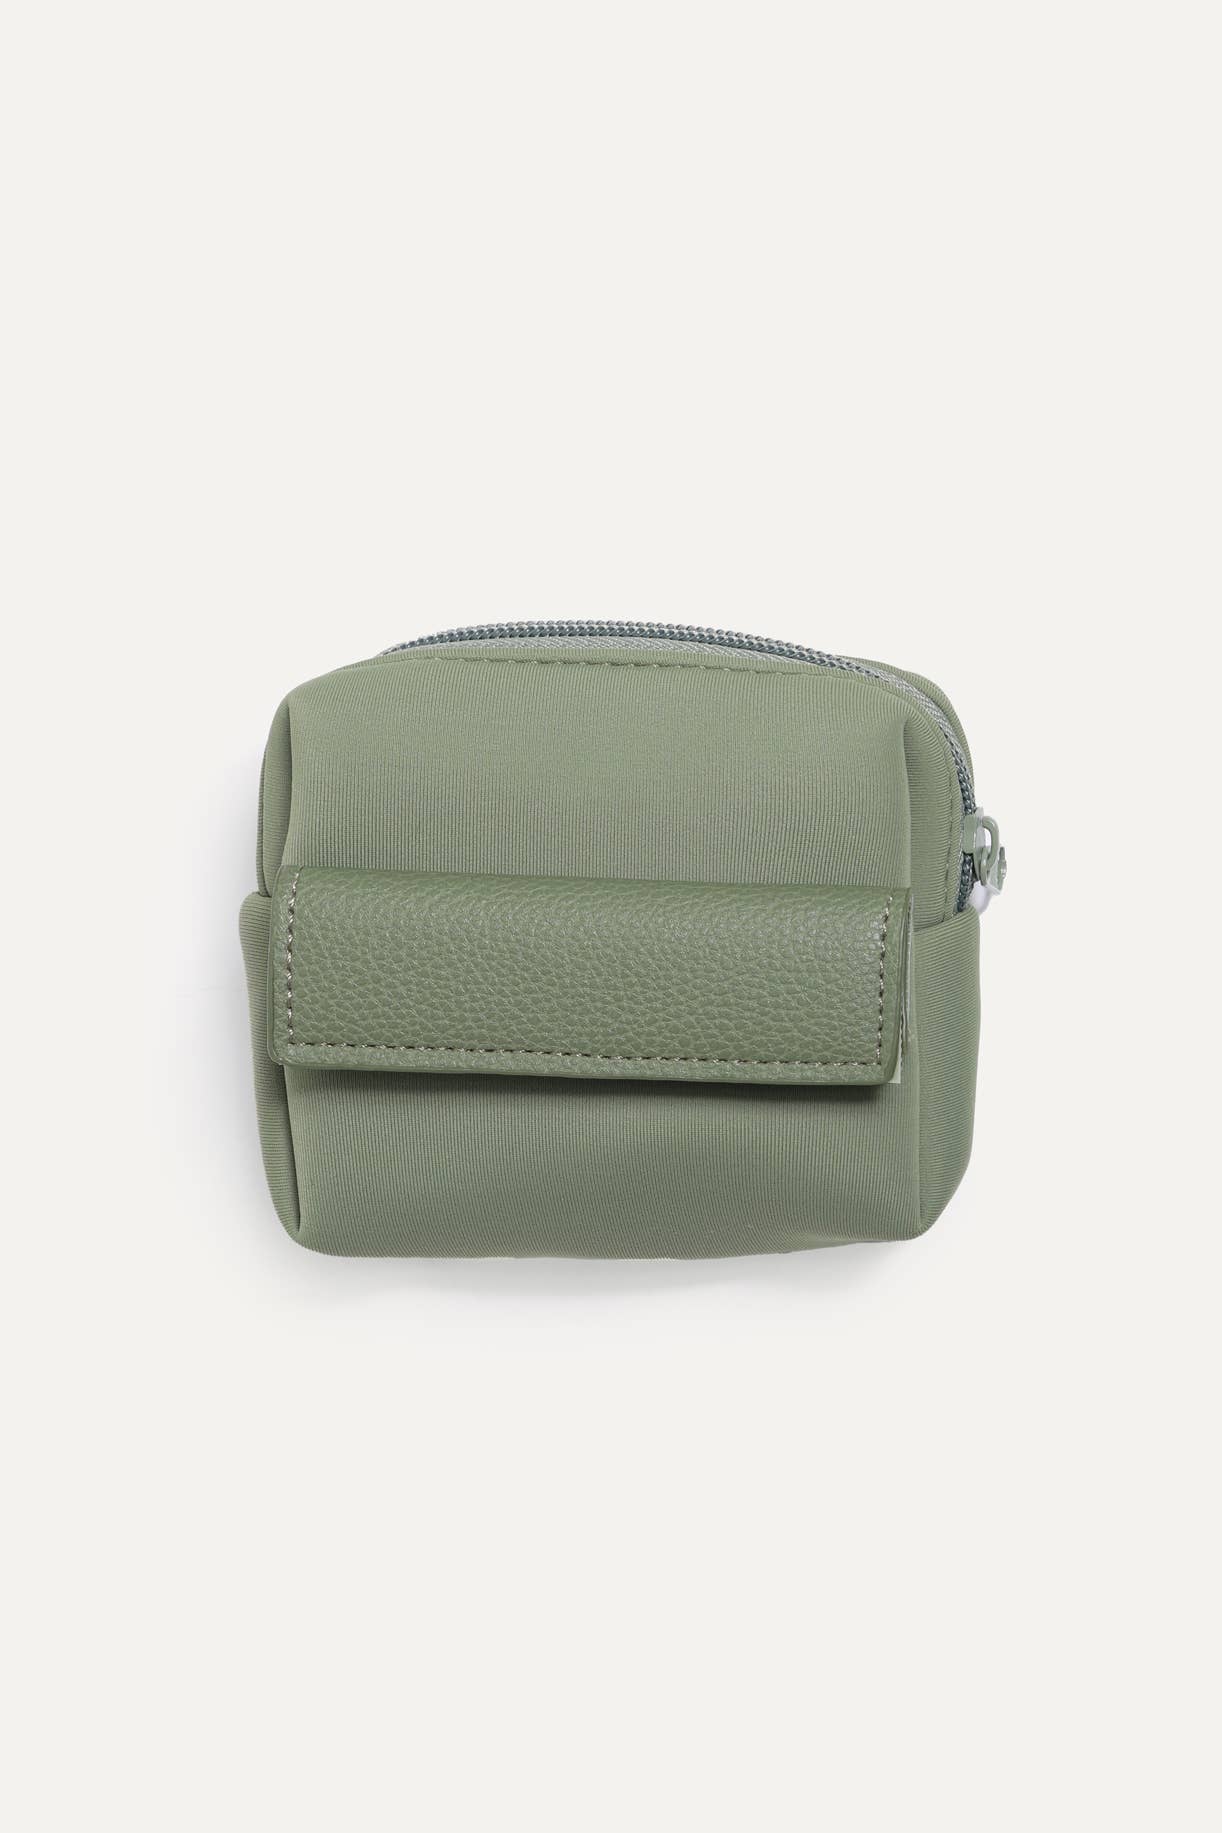 Go with Ease Pouch: Large / Sage